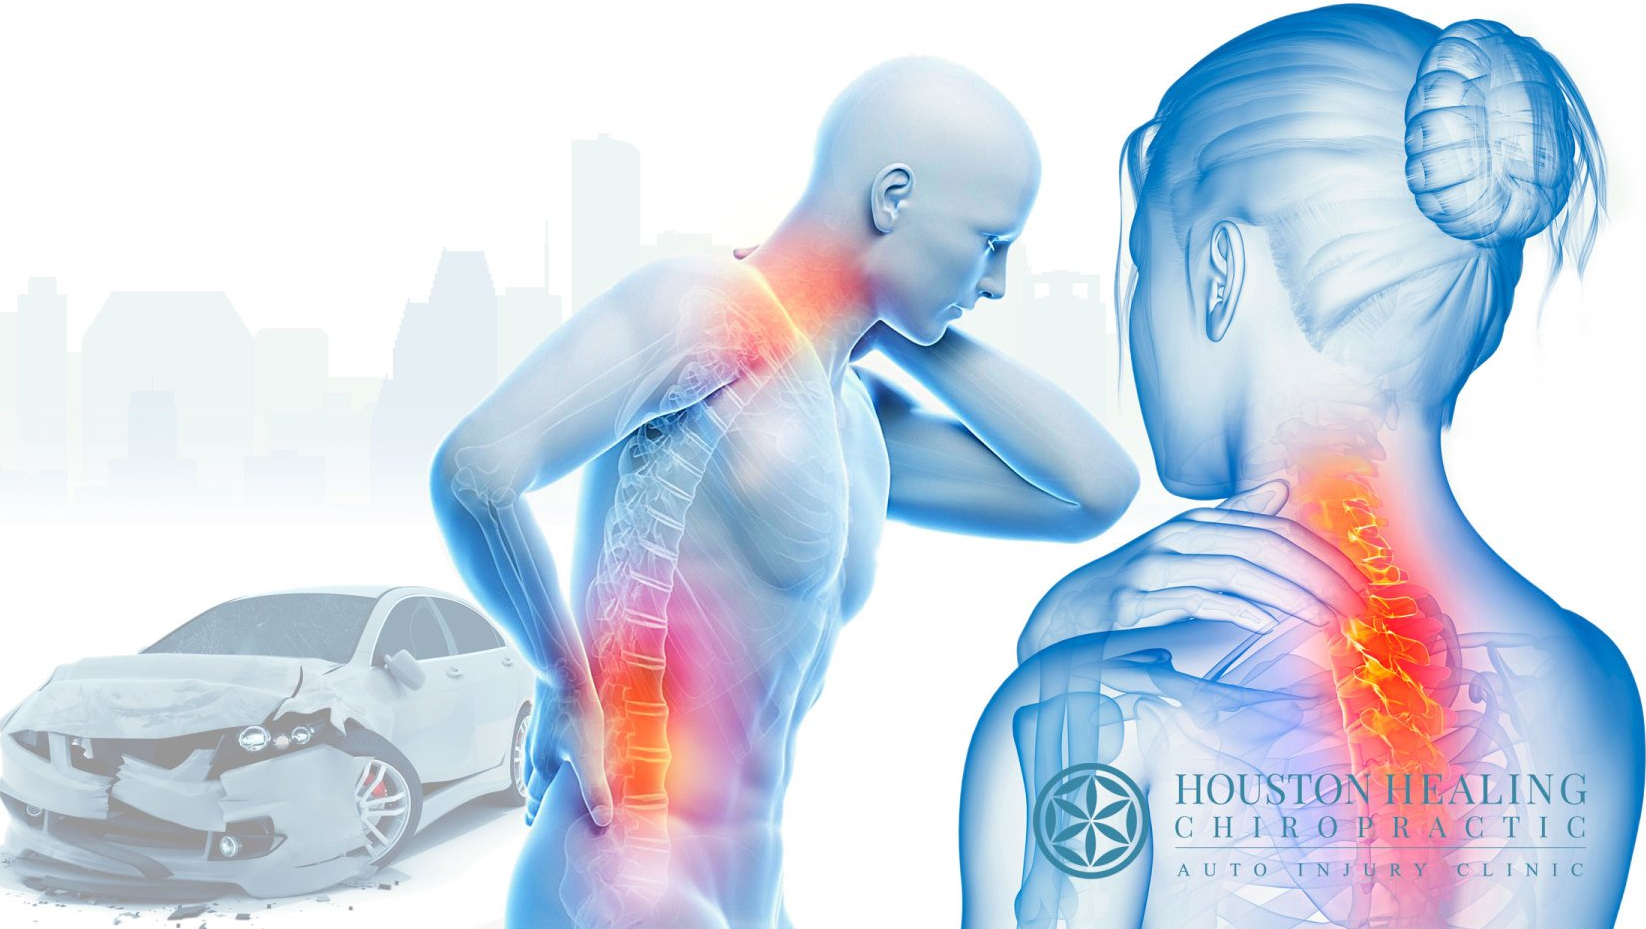 Car accident doctor houston - neck and back pain - houston healing chiropractic